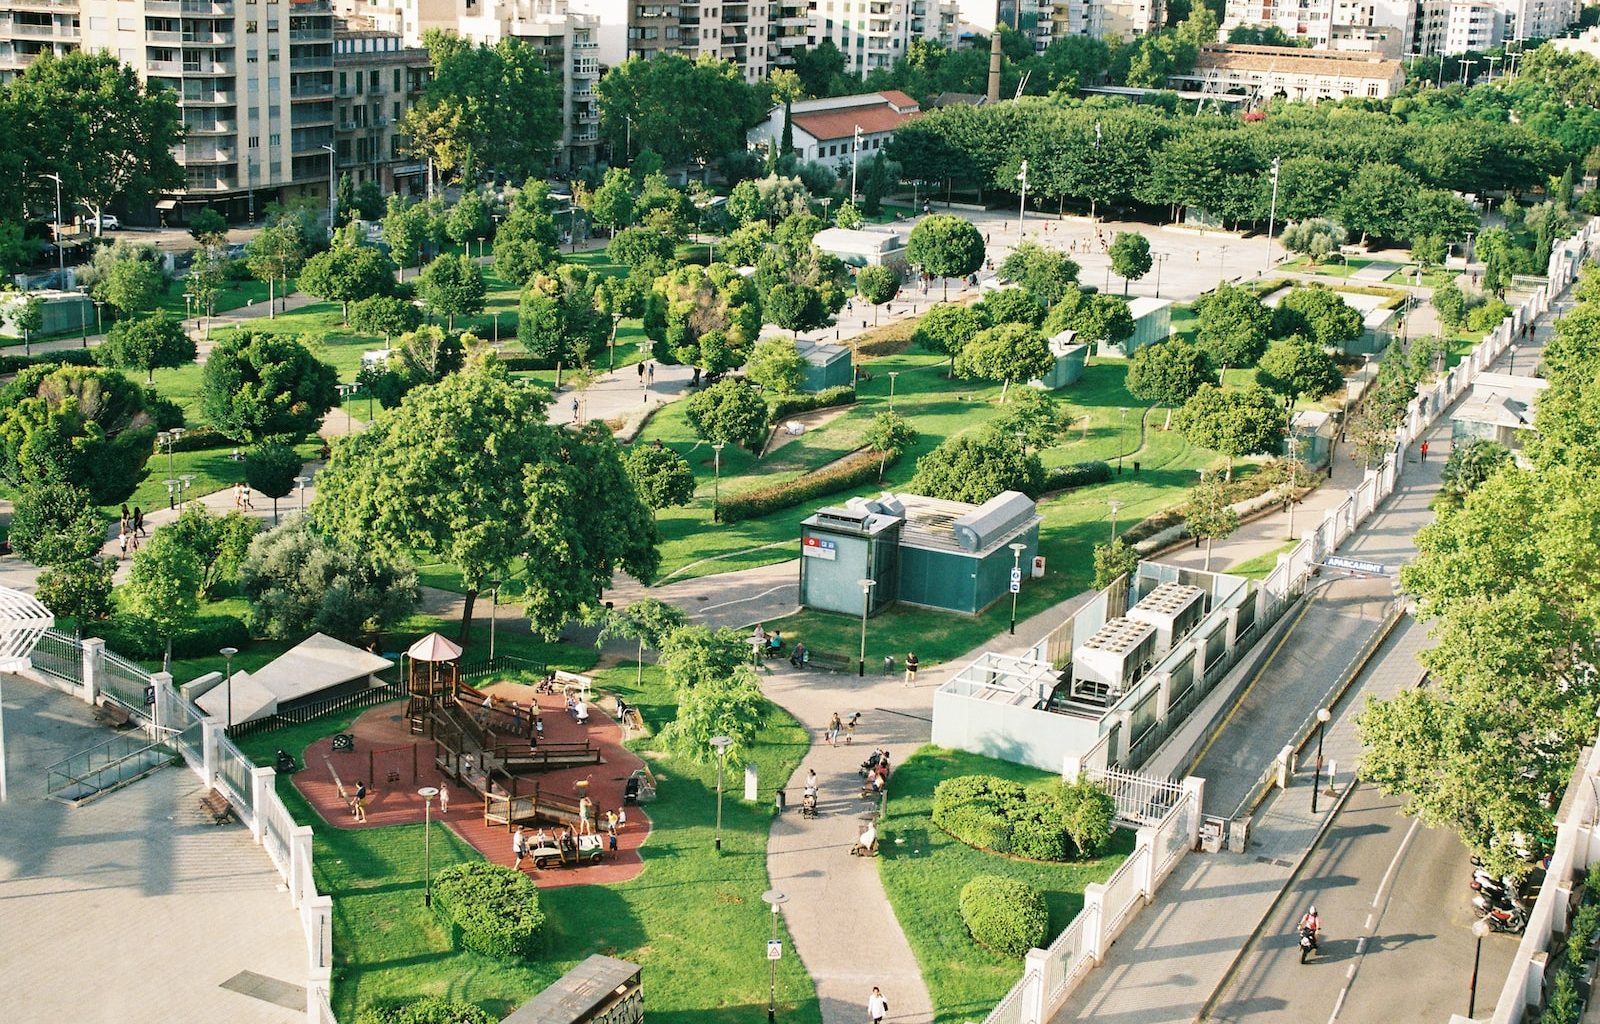 aerial photography plaza with trees and buildings